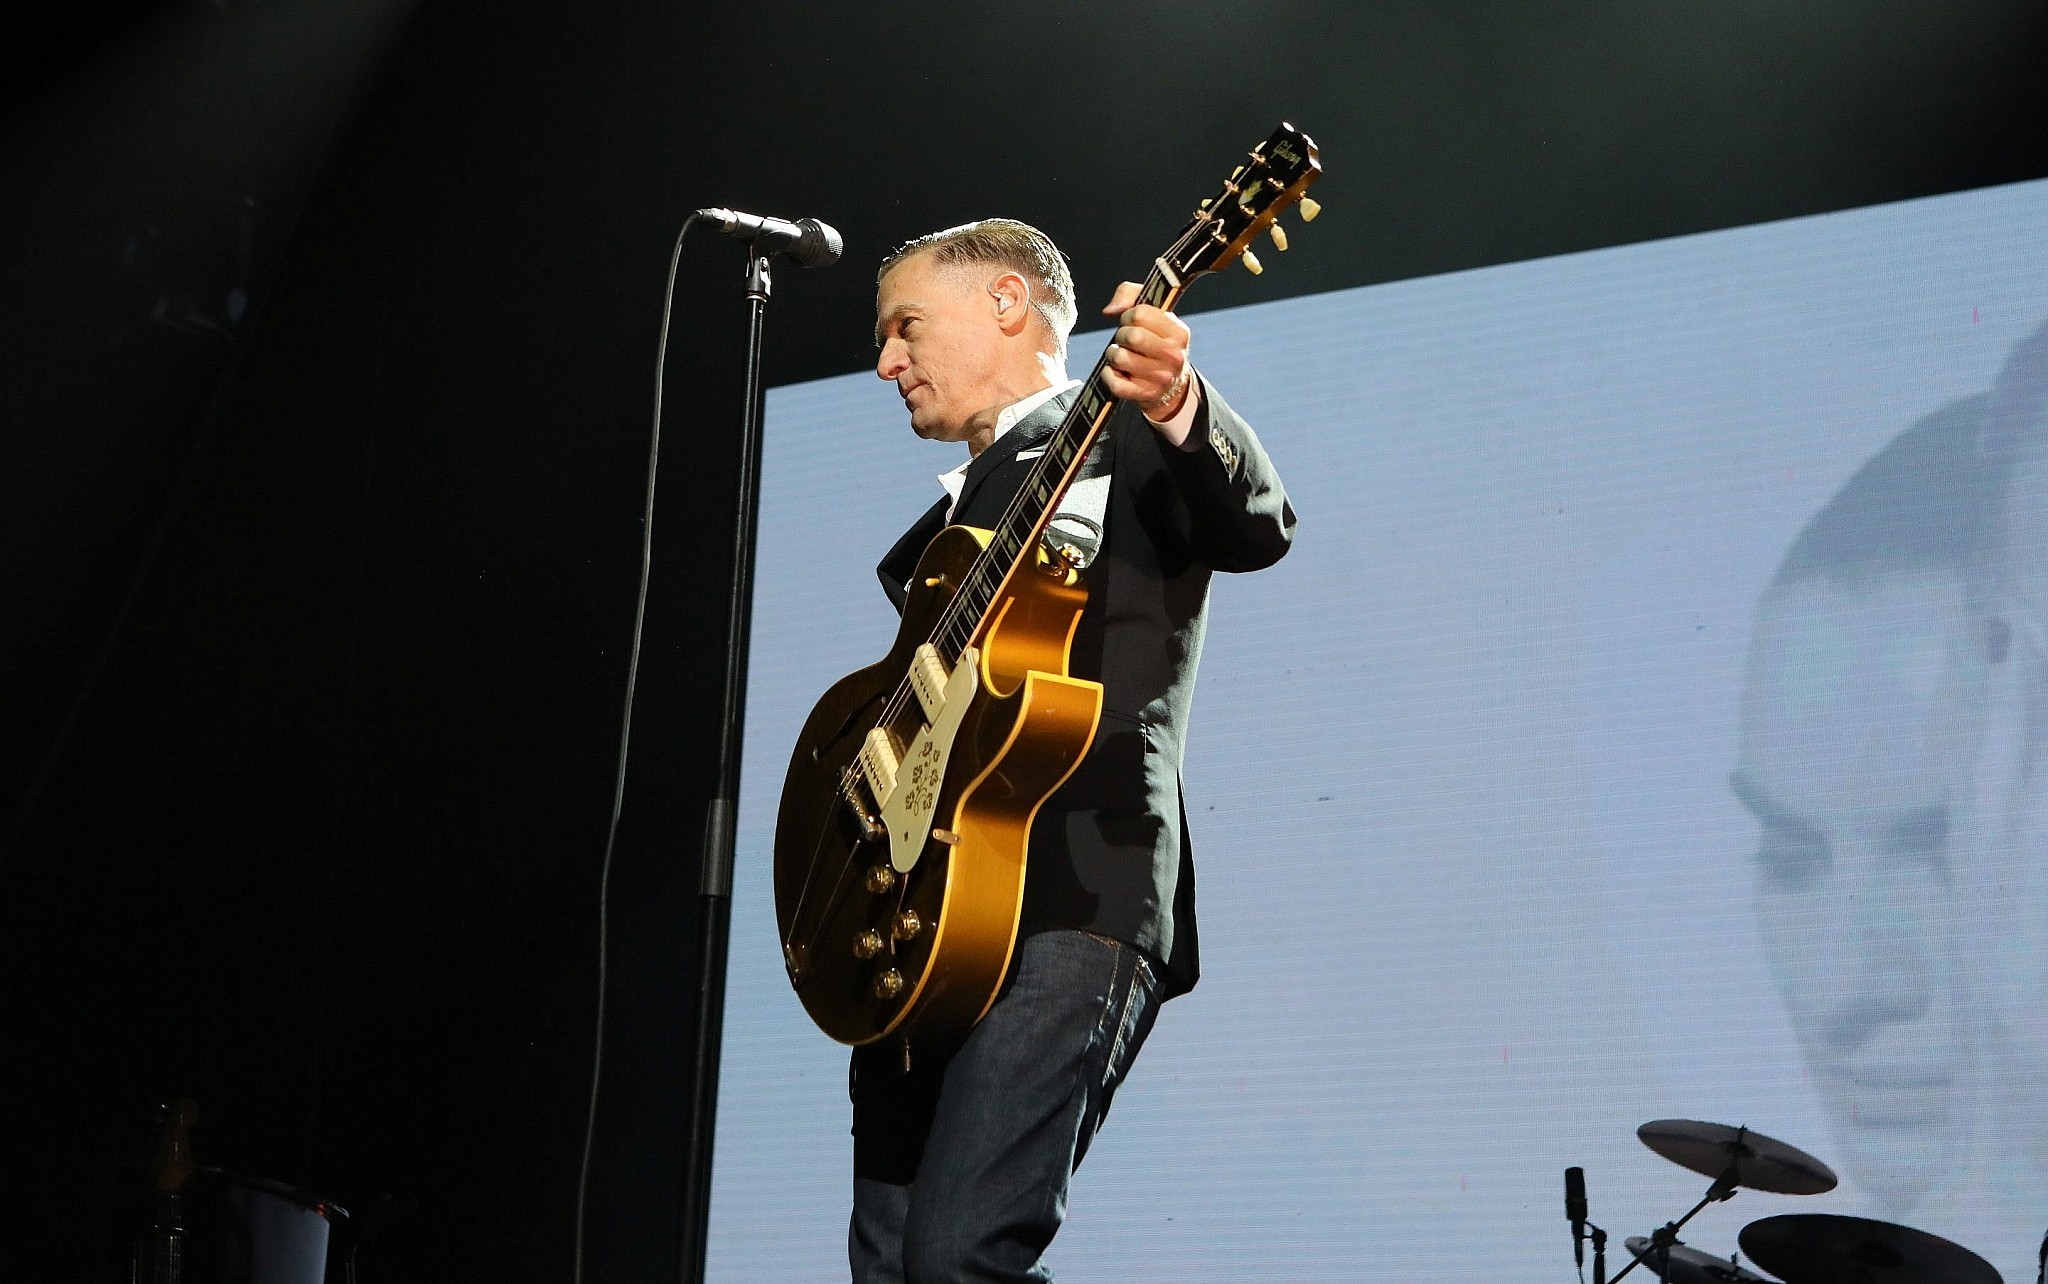 With youthful exuberance, singer Bryan Adams does it for Tel Aviv